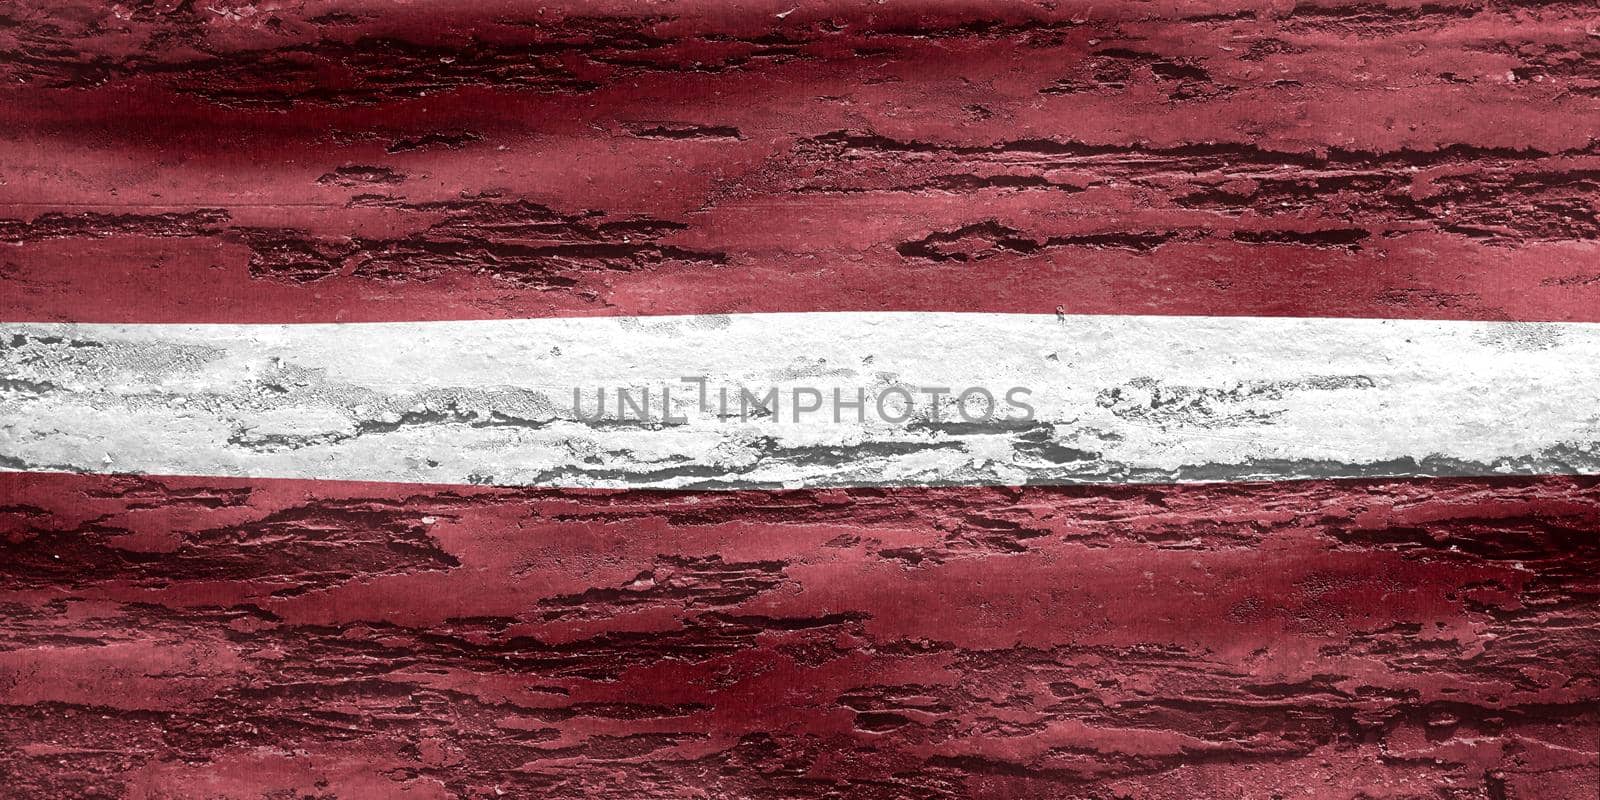 3D-Illustration of a Latvia flag - realistic waving fabric flag by MP_foto71